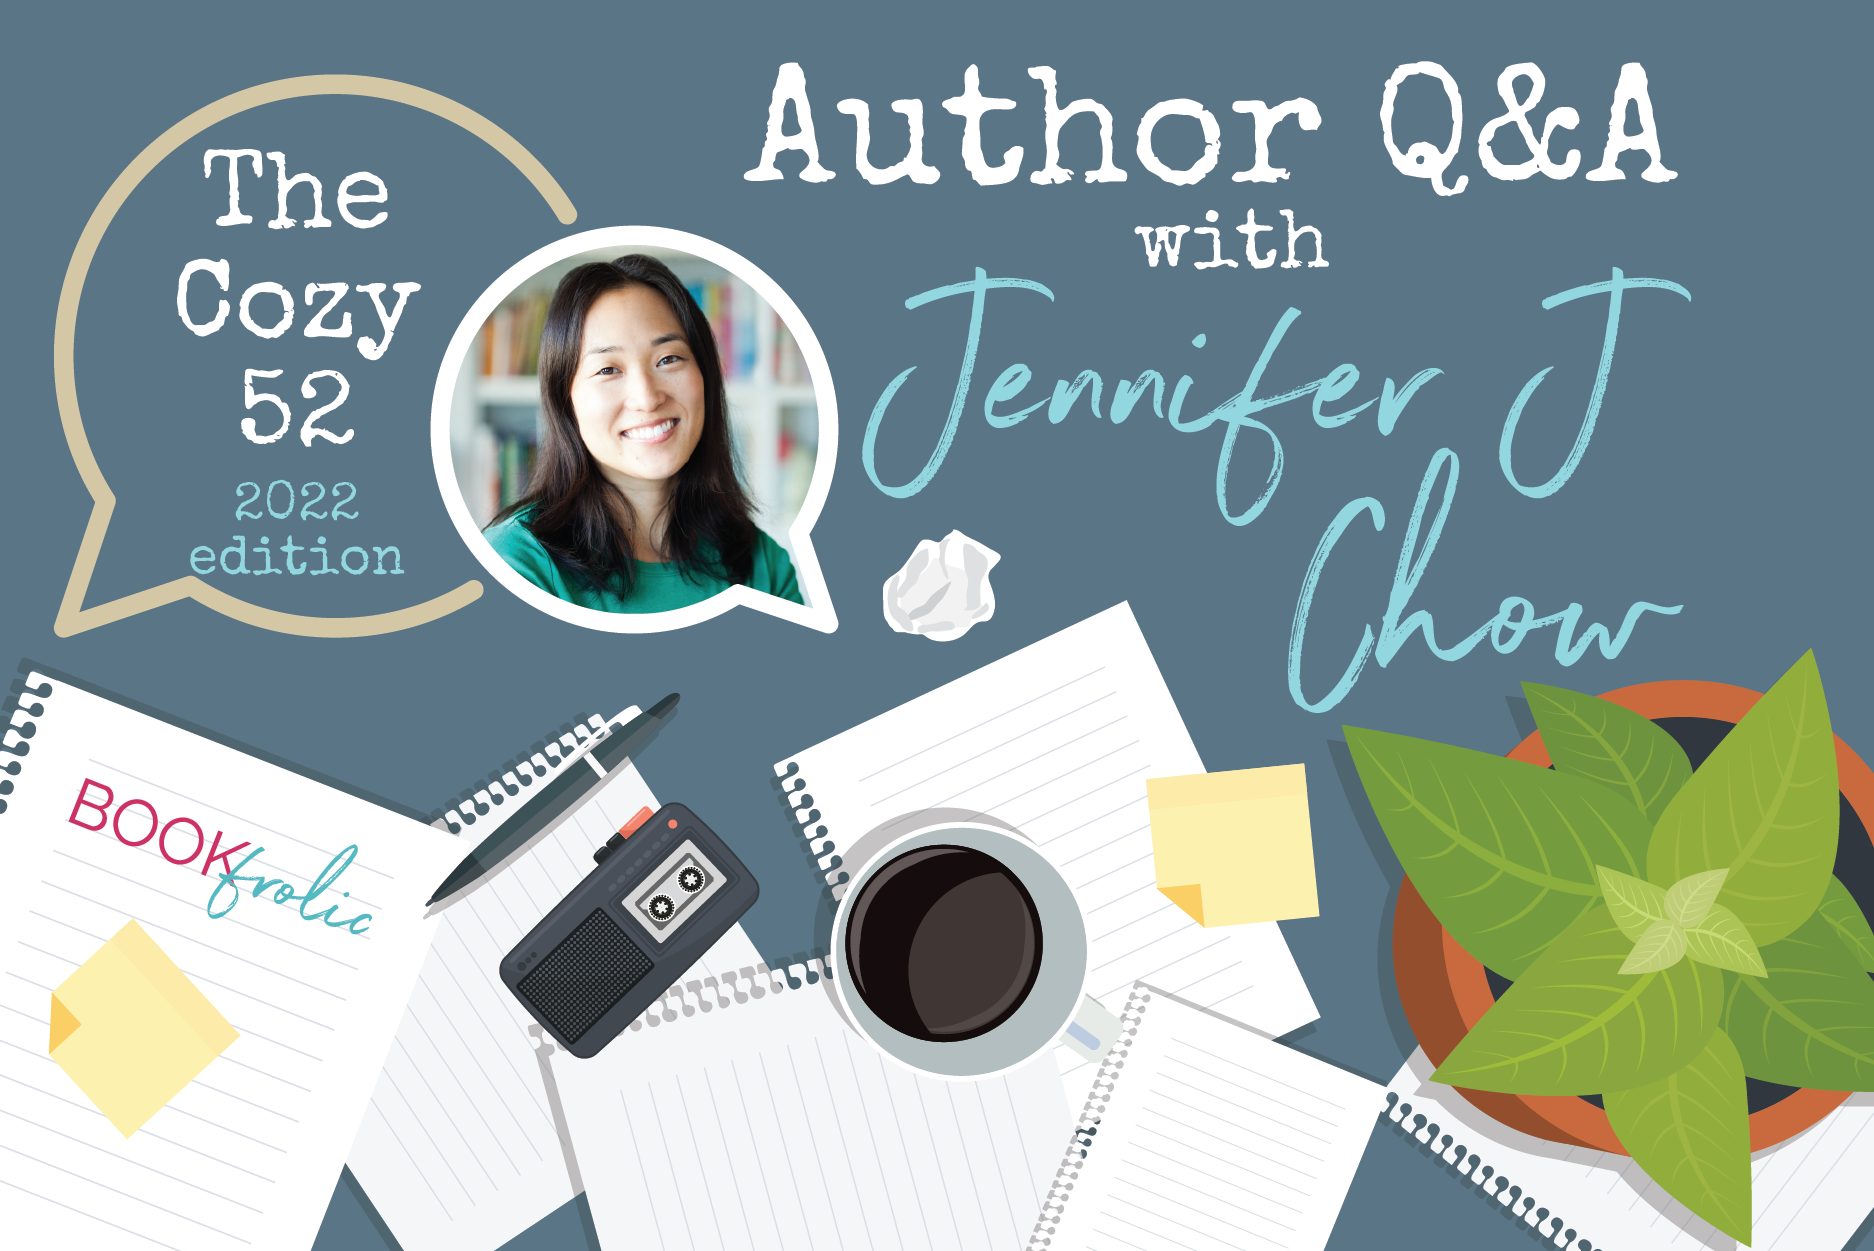 banner for The Cozy 52 interview - Jennifer J Chow